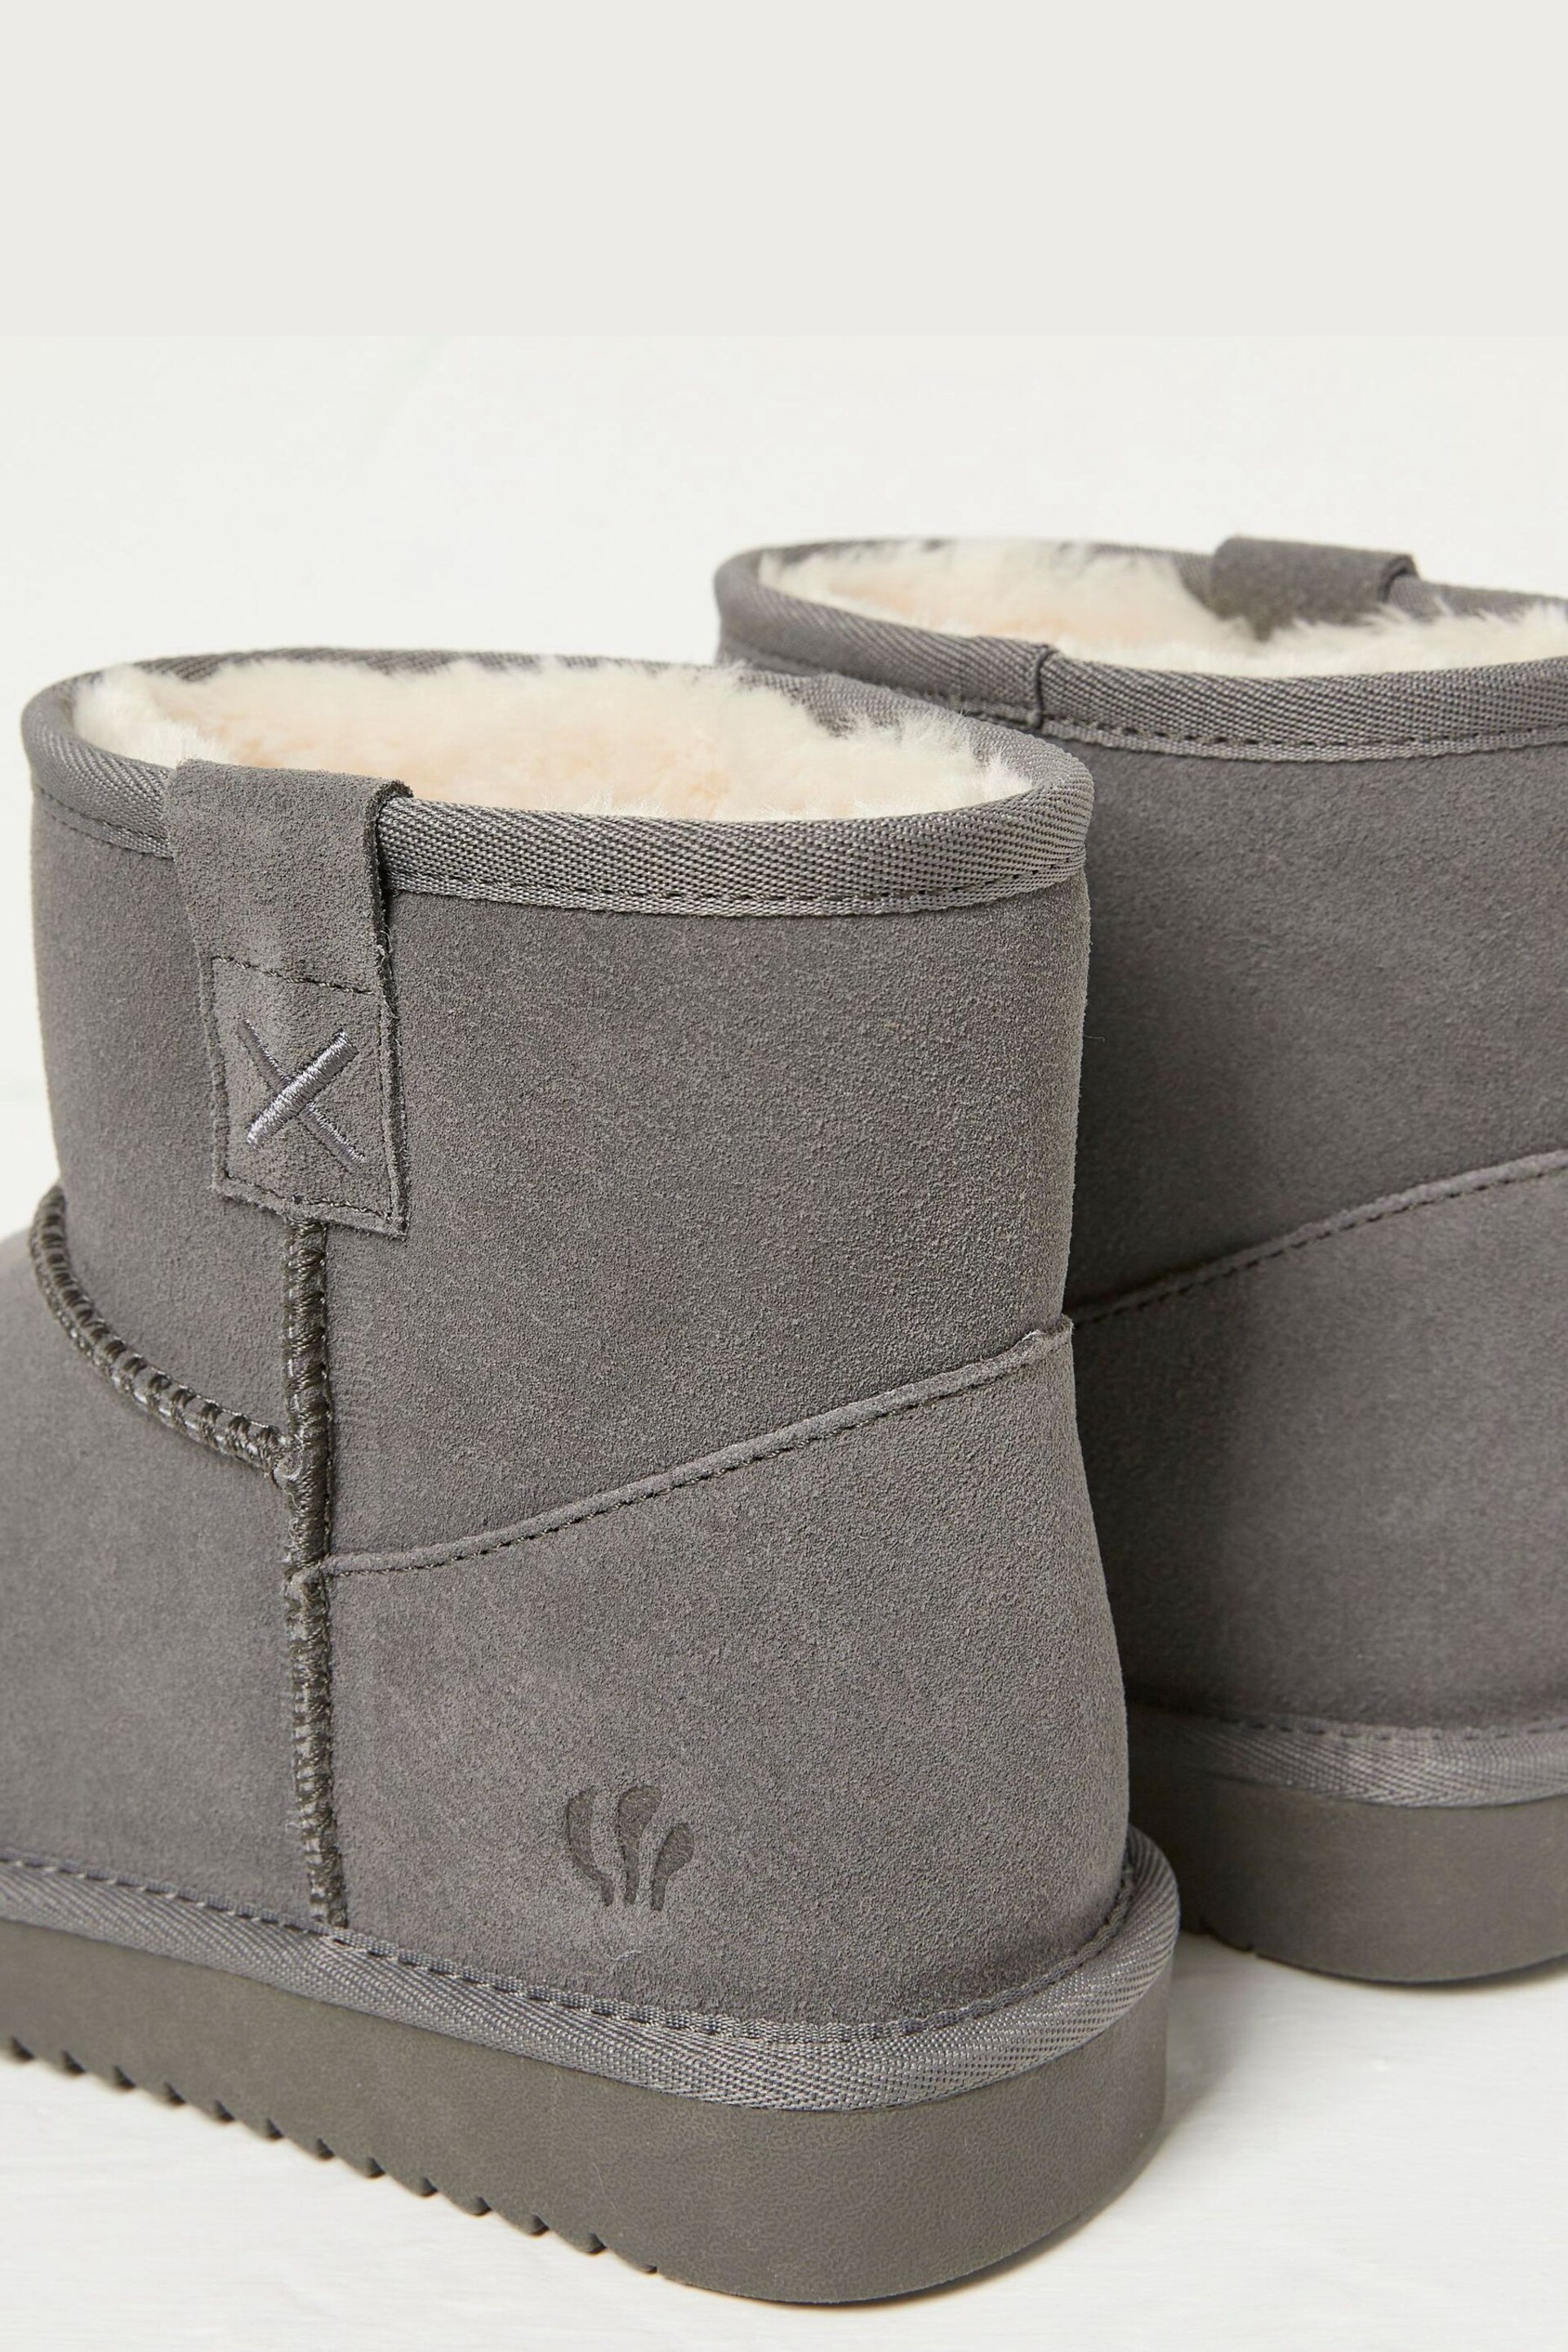 FatFace Grey Suede Slipper Boots - Image 4 of 4